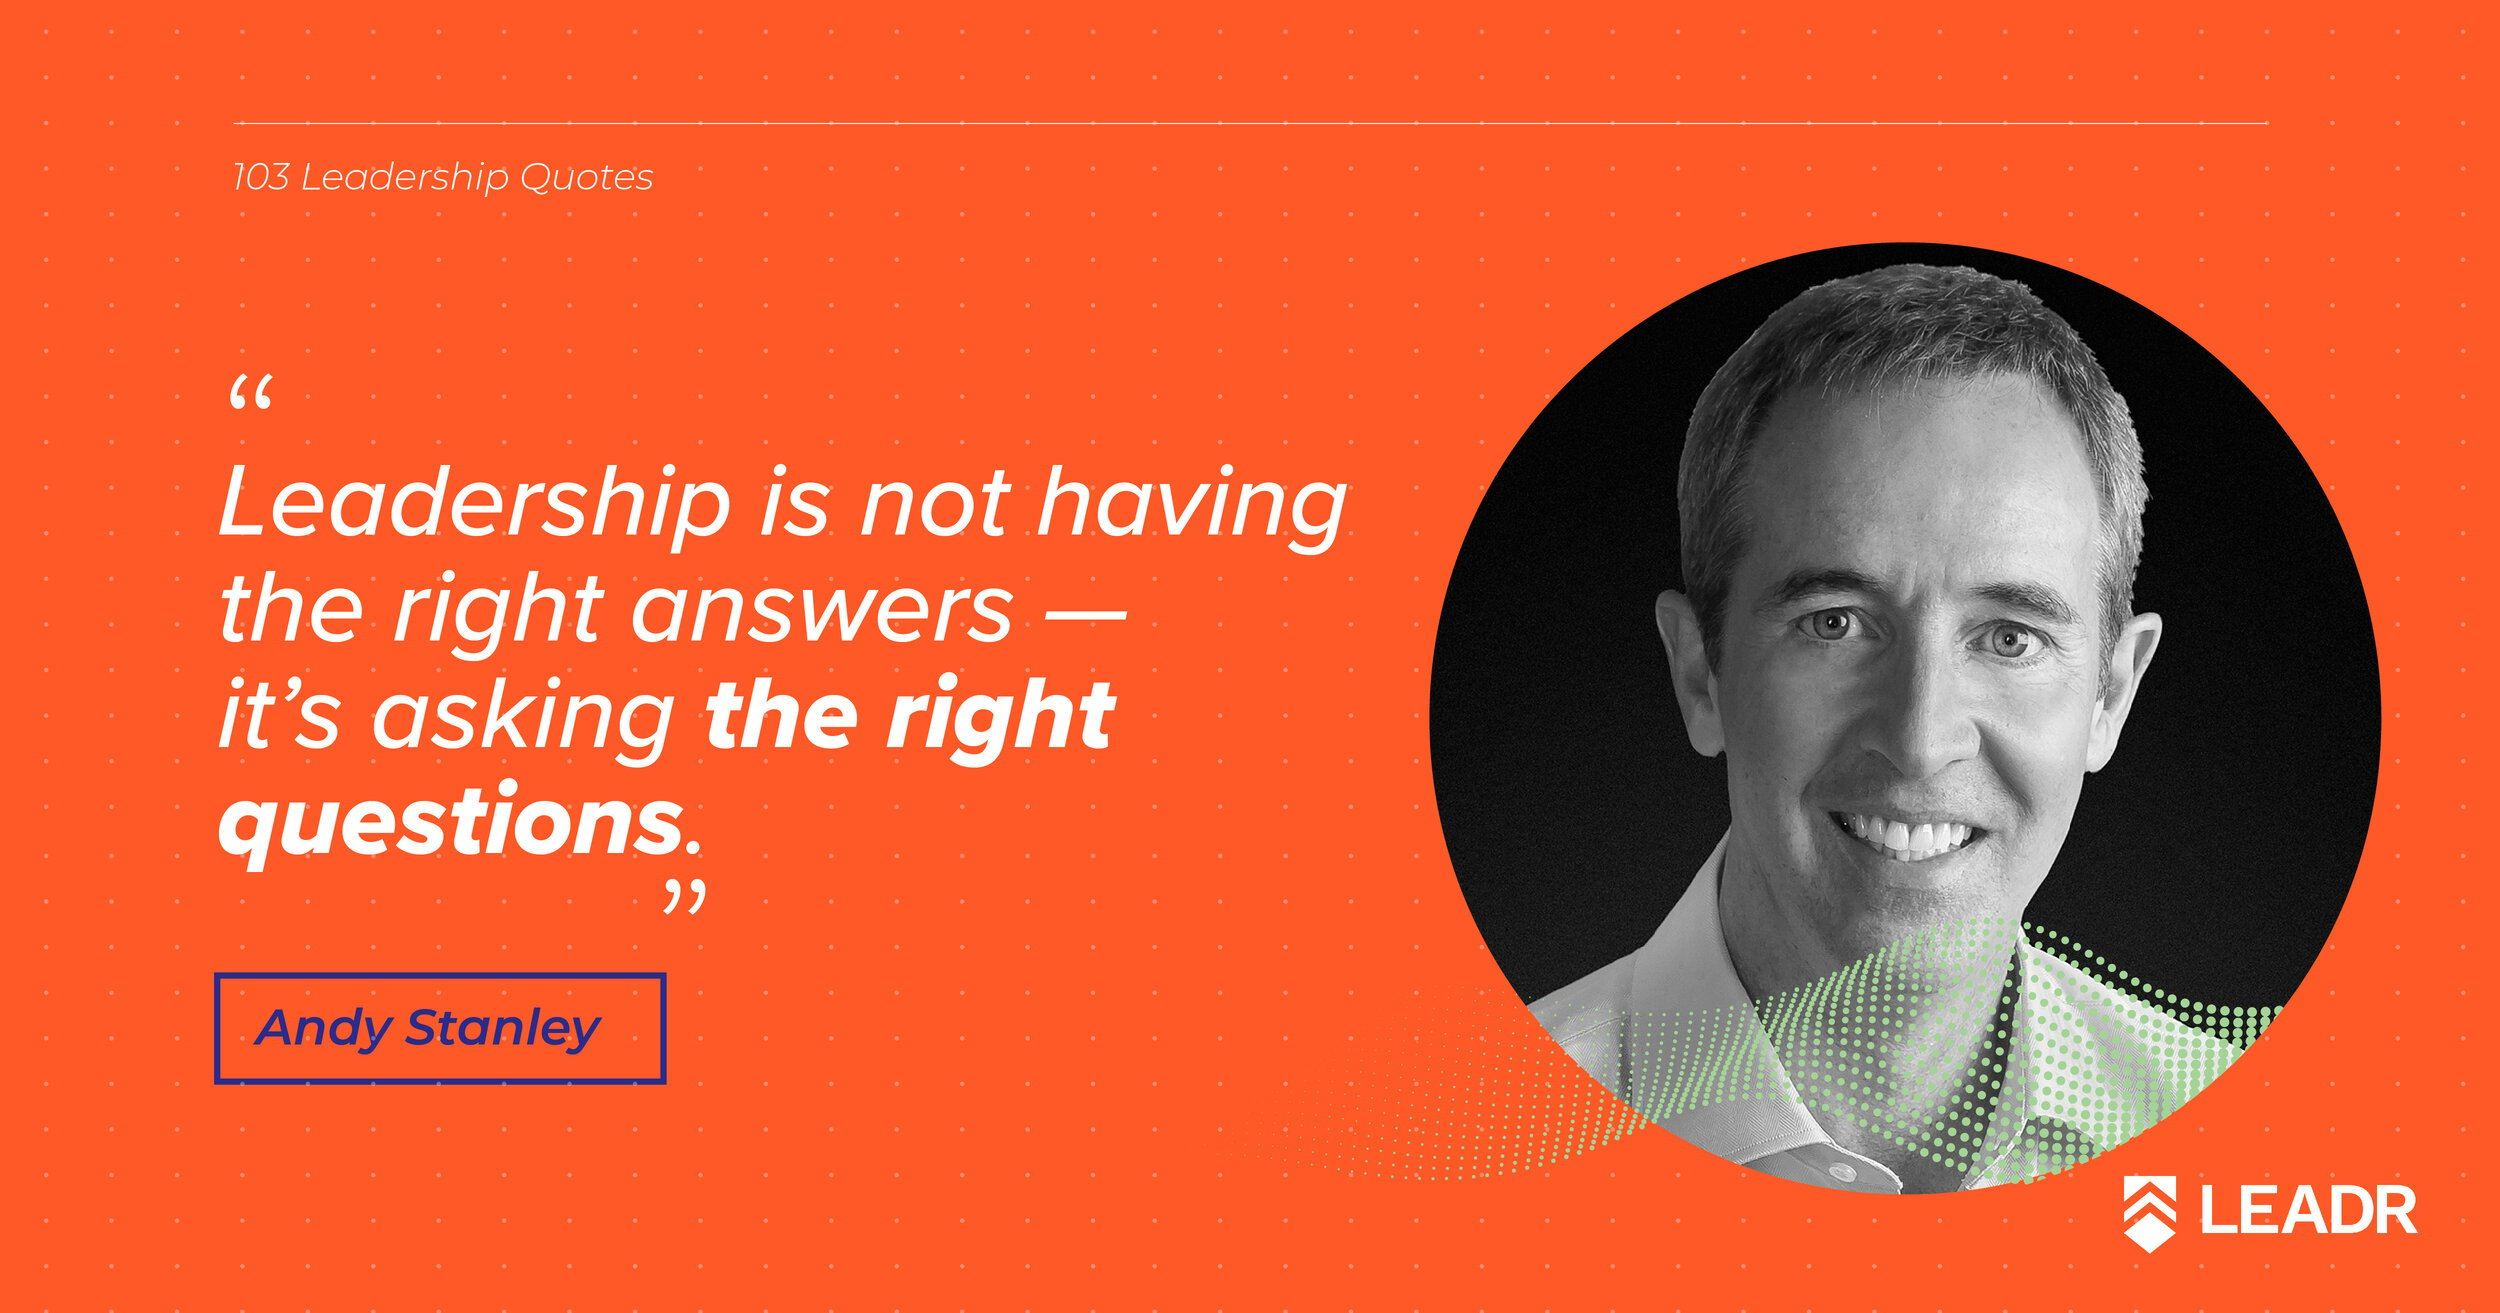 Royalty free downloadable leadership quotes - Andy Stanley